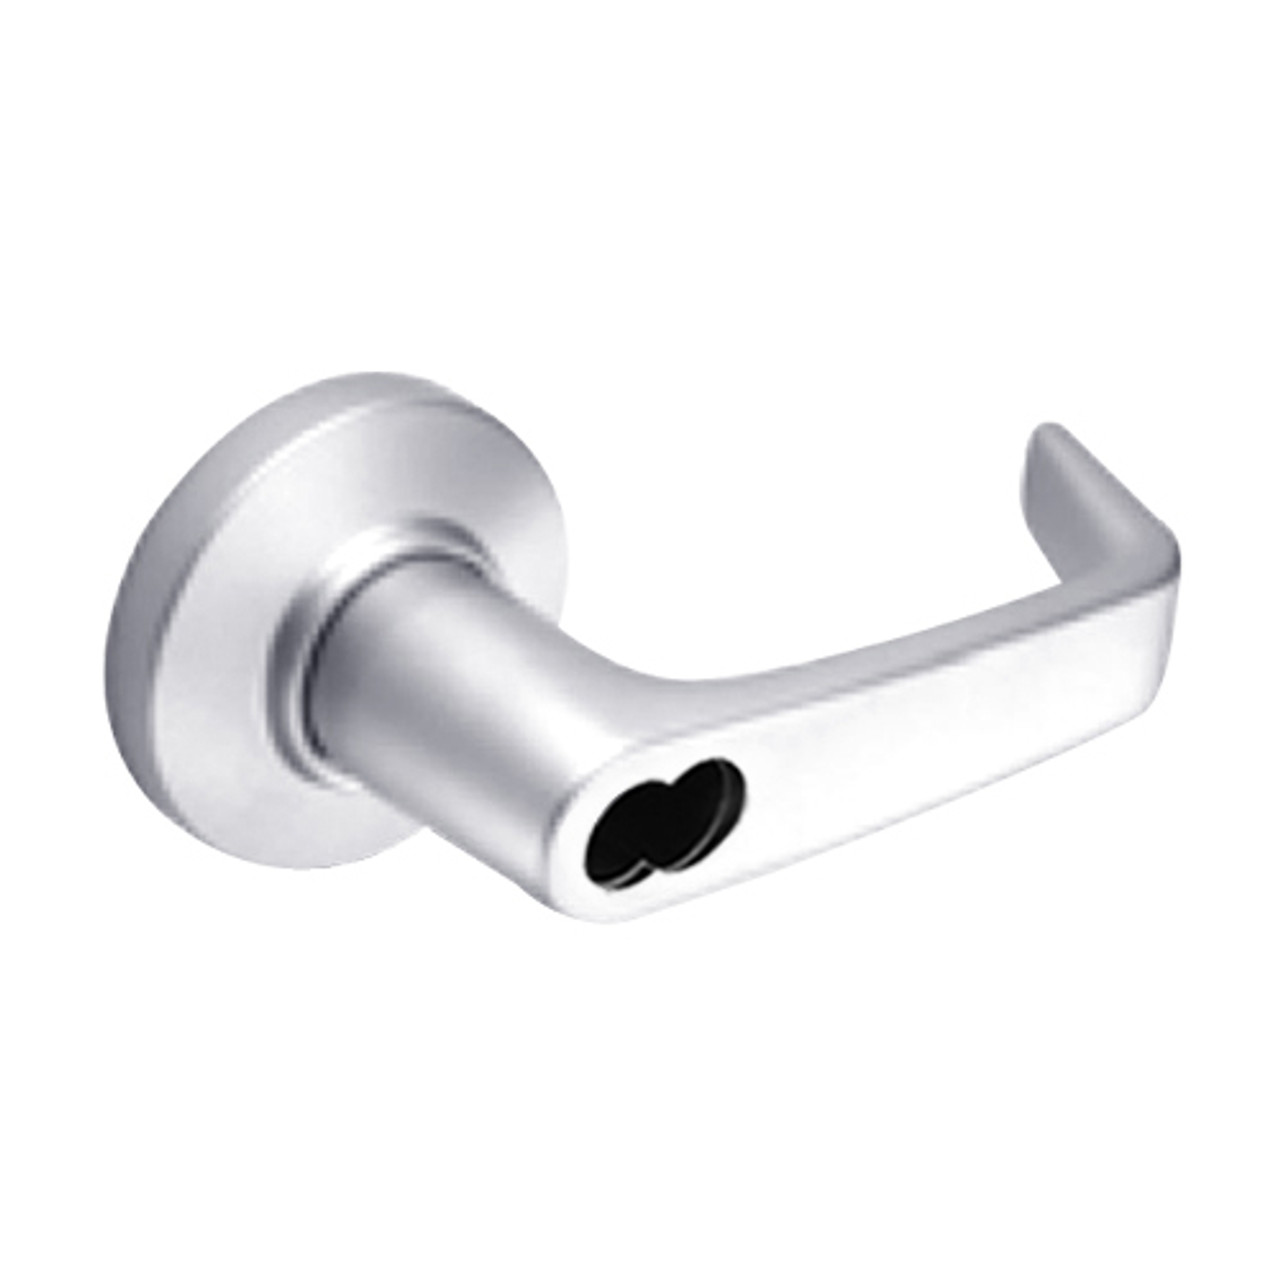 9K37A15CSTK625 Best 9K Series Dormitory or Storeroom Cylindrical Lever Locks with Contour Angle with Return Lever Design Accept 7 Pin Best Core in Bright Chrome